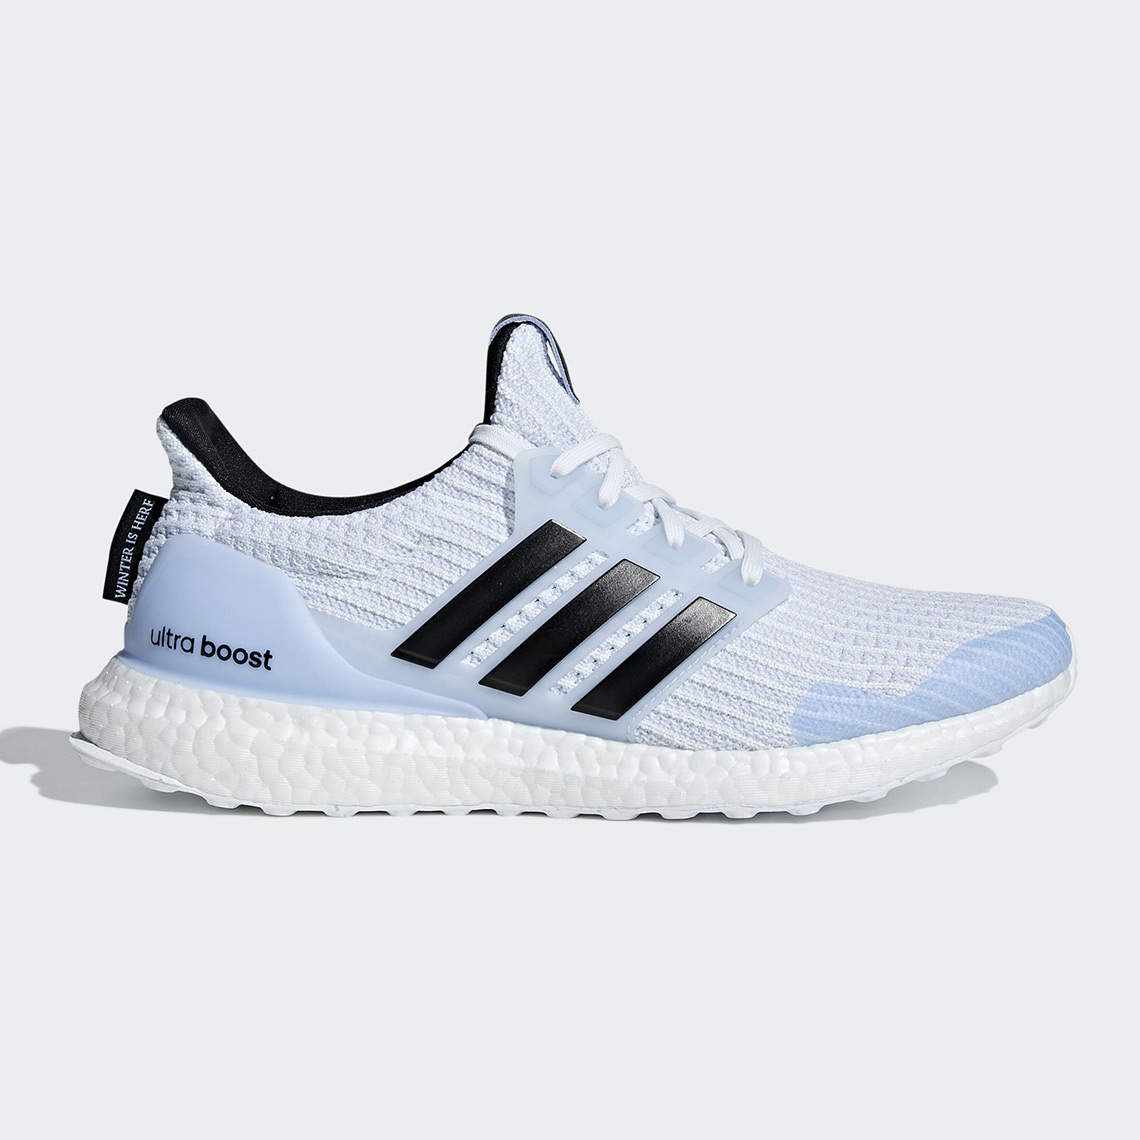 adidas ultra boost game of thrones white walkers EE3708 1